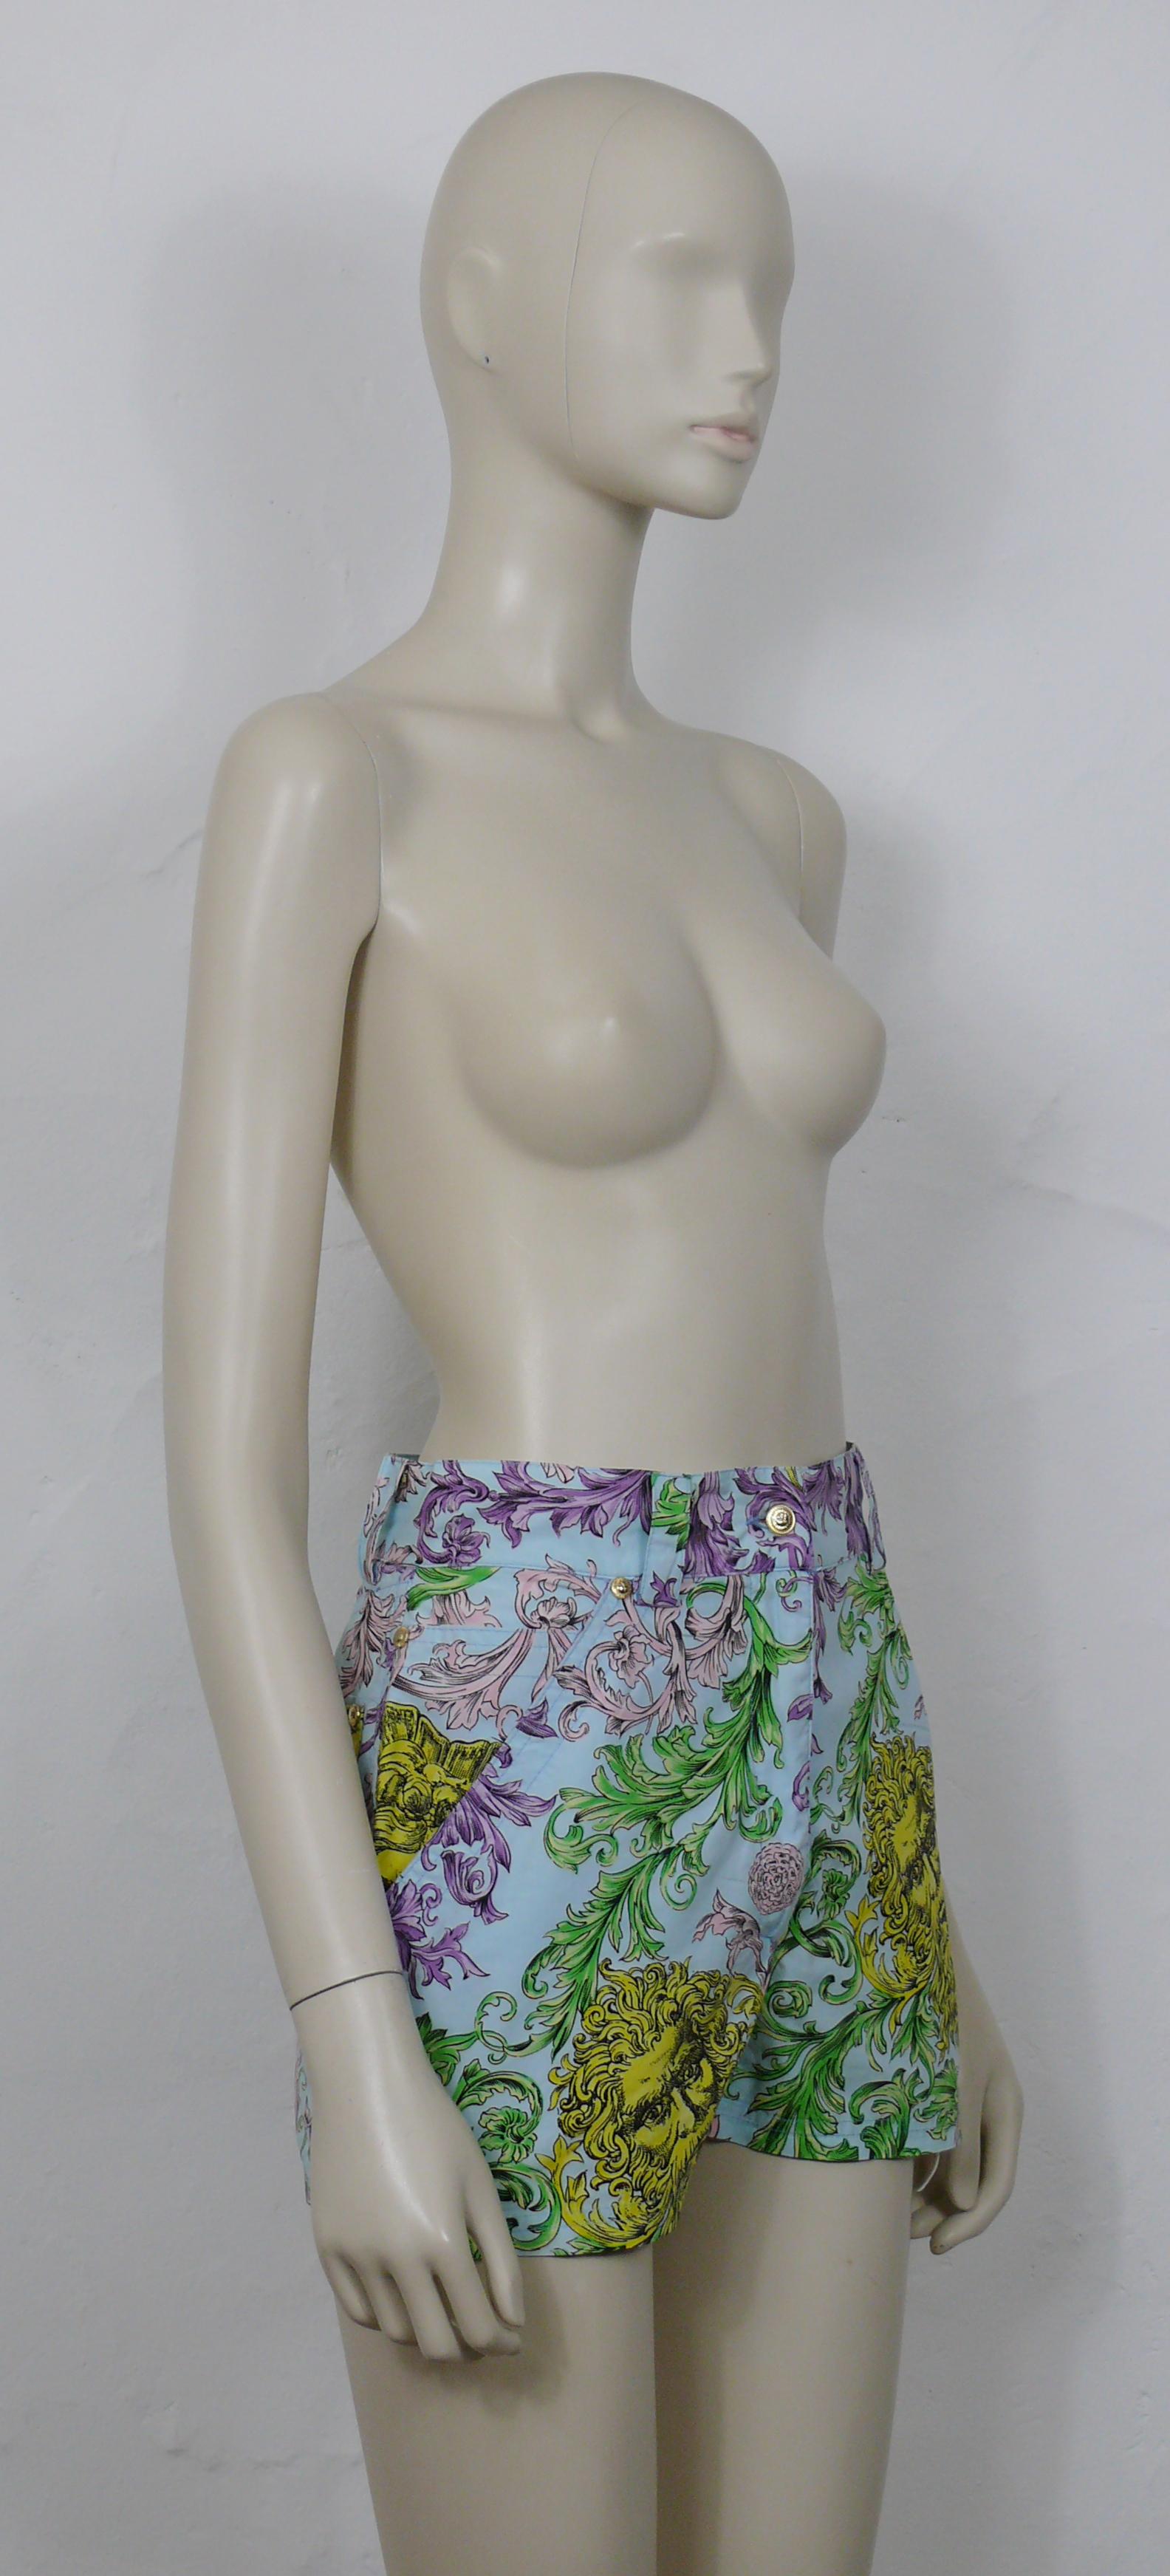 VERSACE JEANS COUTURE vintage multicolor Barocco print shorts.

These shorts feature :
- Multicolor Barocco print featuring Roman Antique heads and acanthus leaves.
- Light blue color background.
- Button and zipper closure at the front.
- Belt